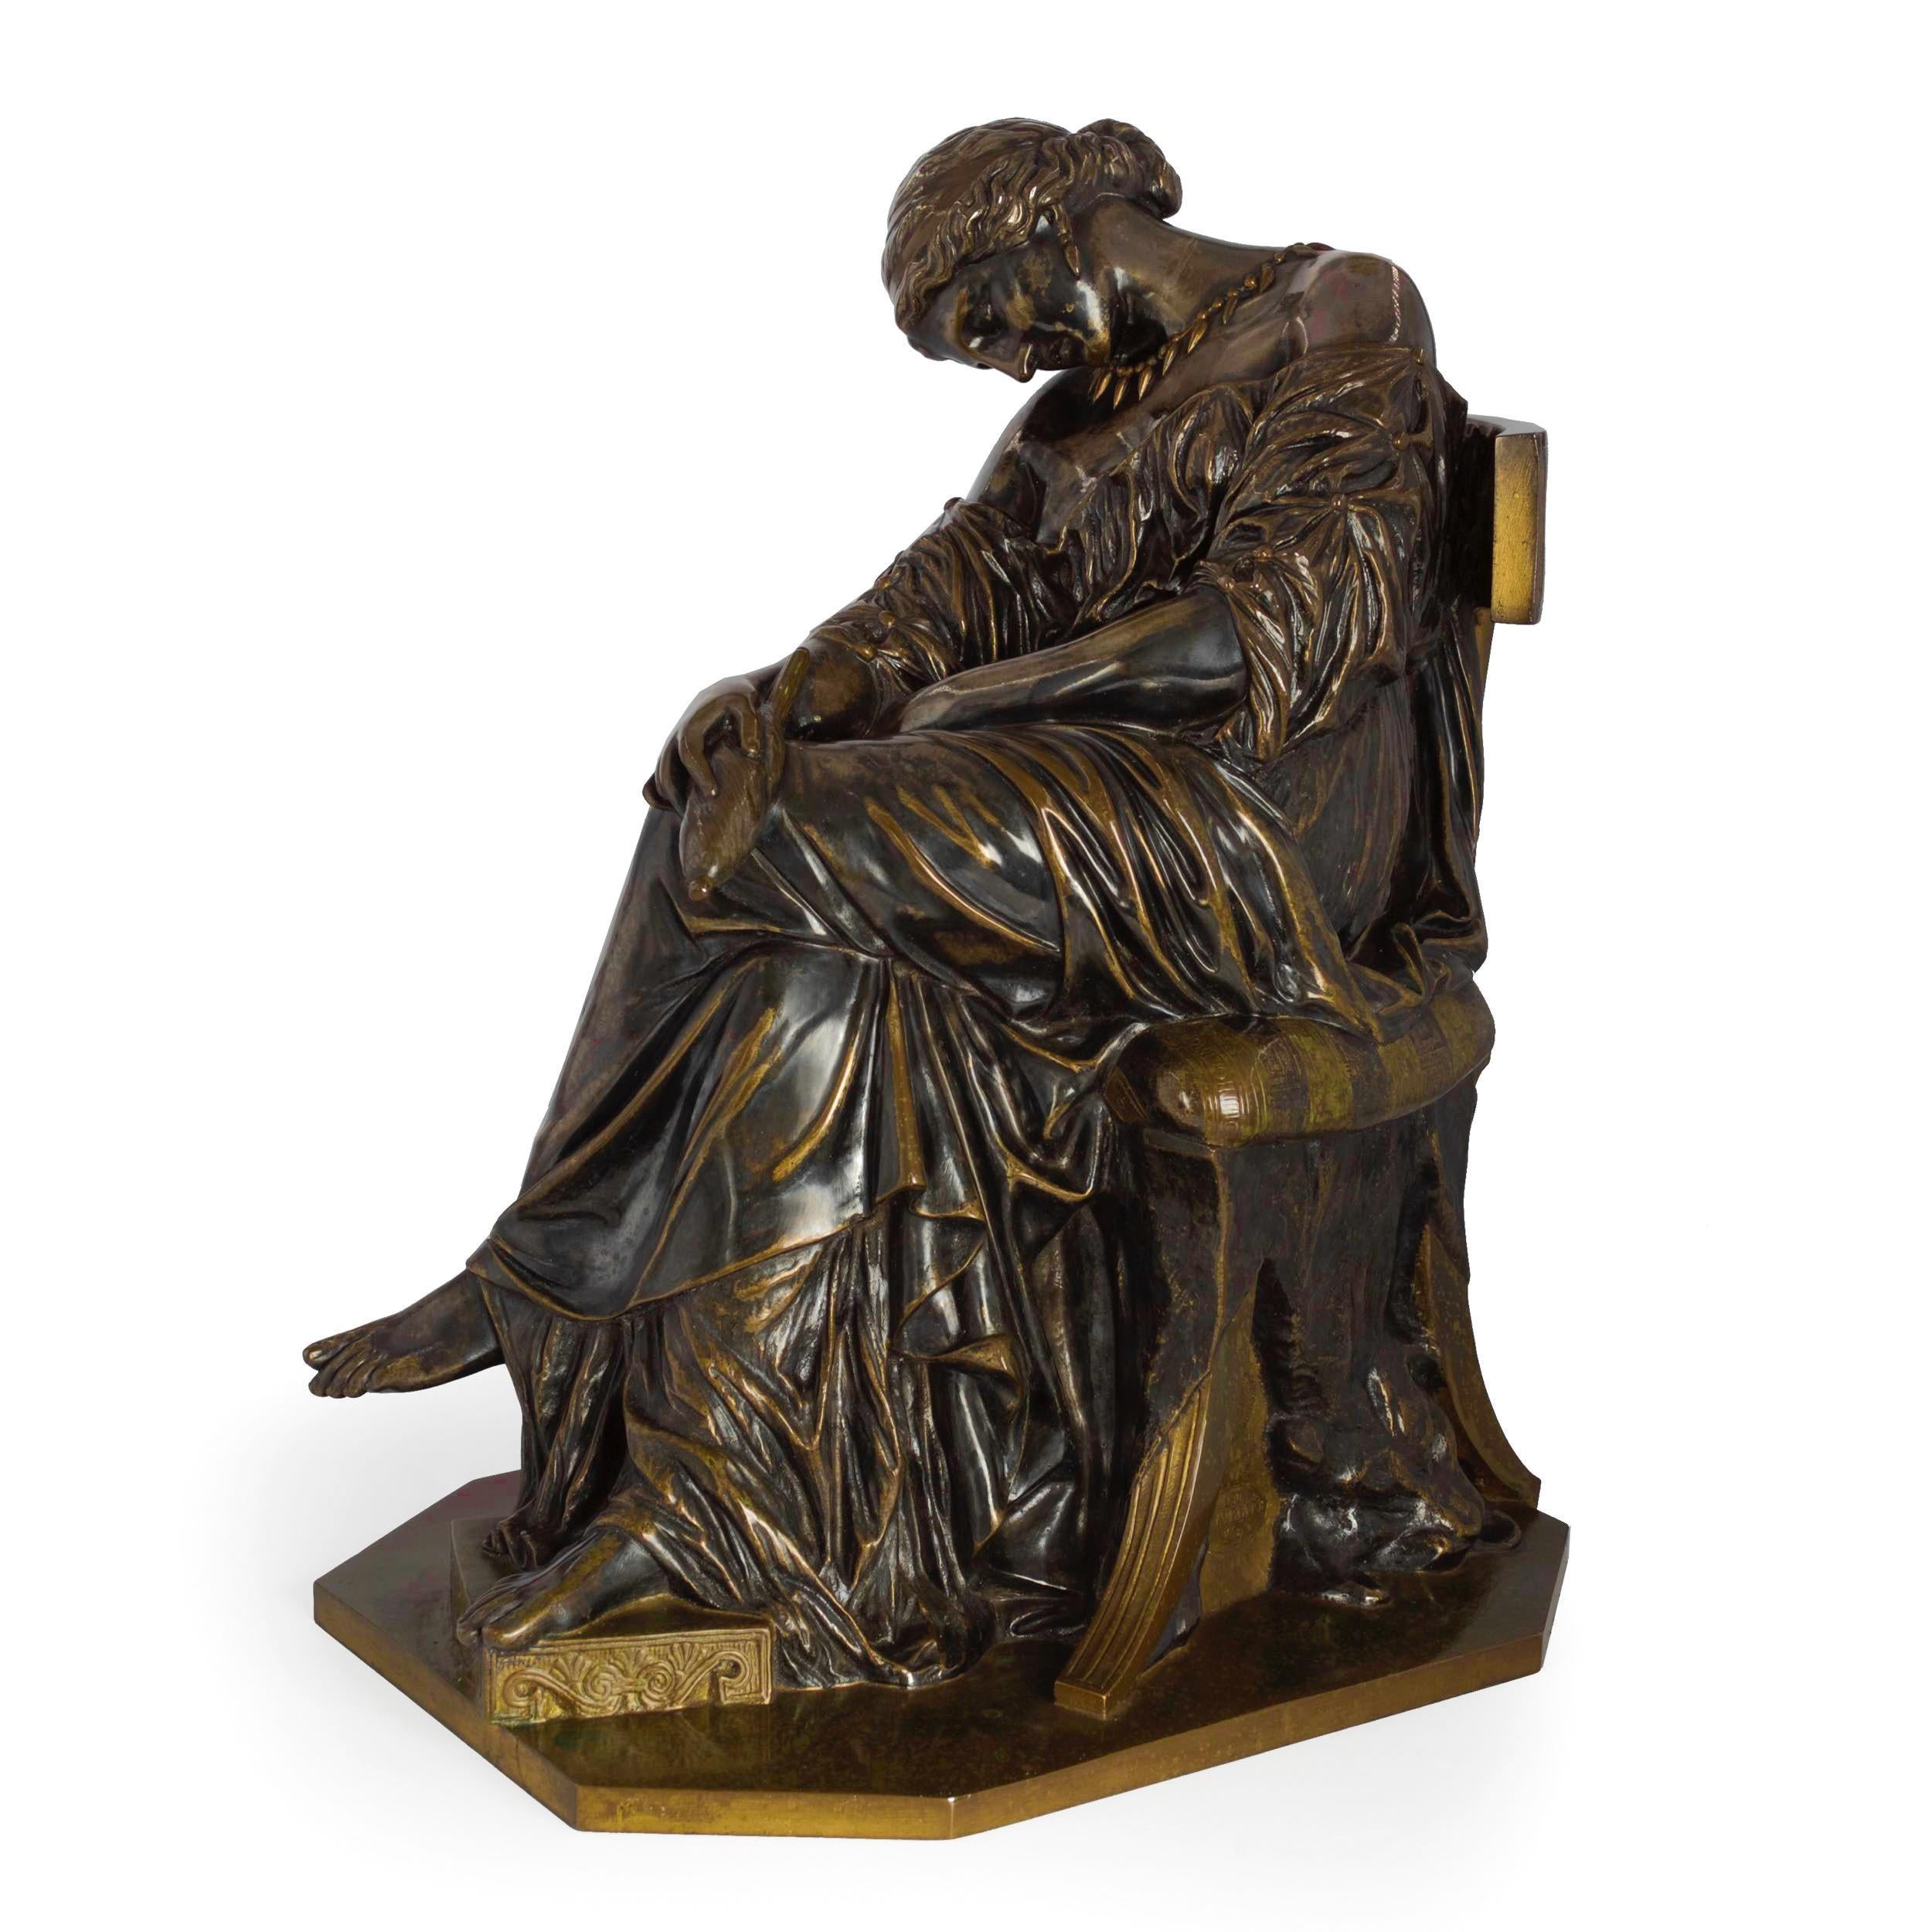 This is a precious little antique bronze sculpture by Pierre Jules Cavelier, originally exhibited at Salon in 1842 as Femme Grecque Edormie in plaster, was later exhibited in 1849 as a marble sculpture under the title of Penelope. It was cast almost